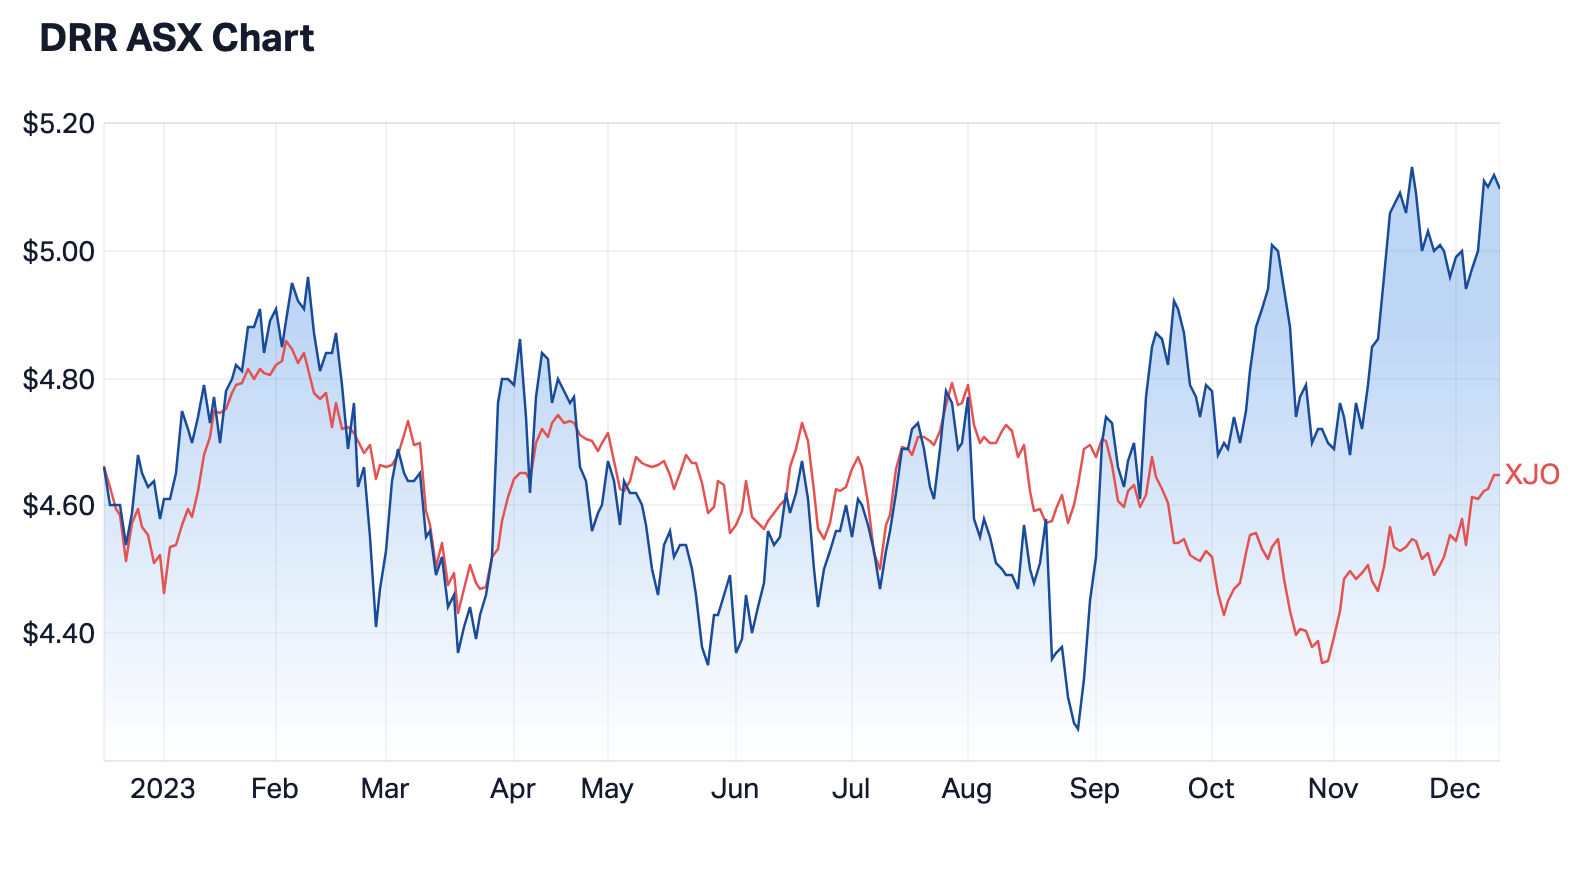 DRR shares versus the ASX 200 (as shown in red). Source: Market Index